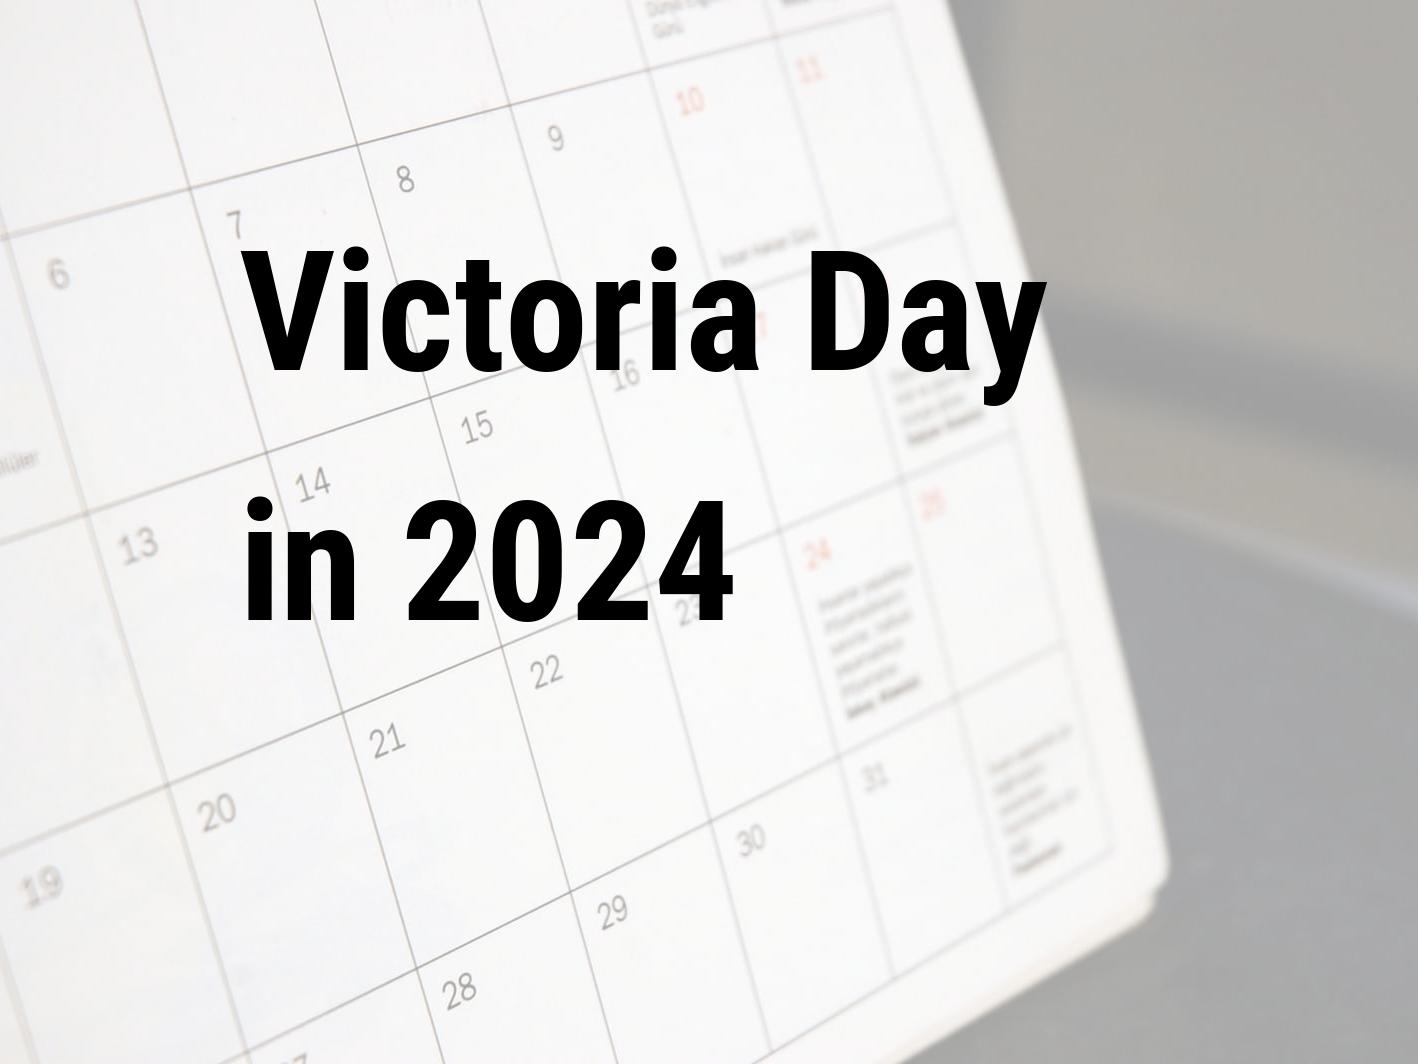 Victoria Day 2024. When is Victoria Day in 2024